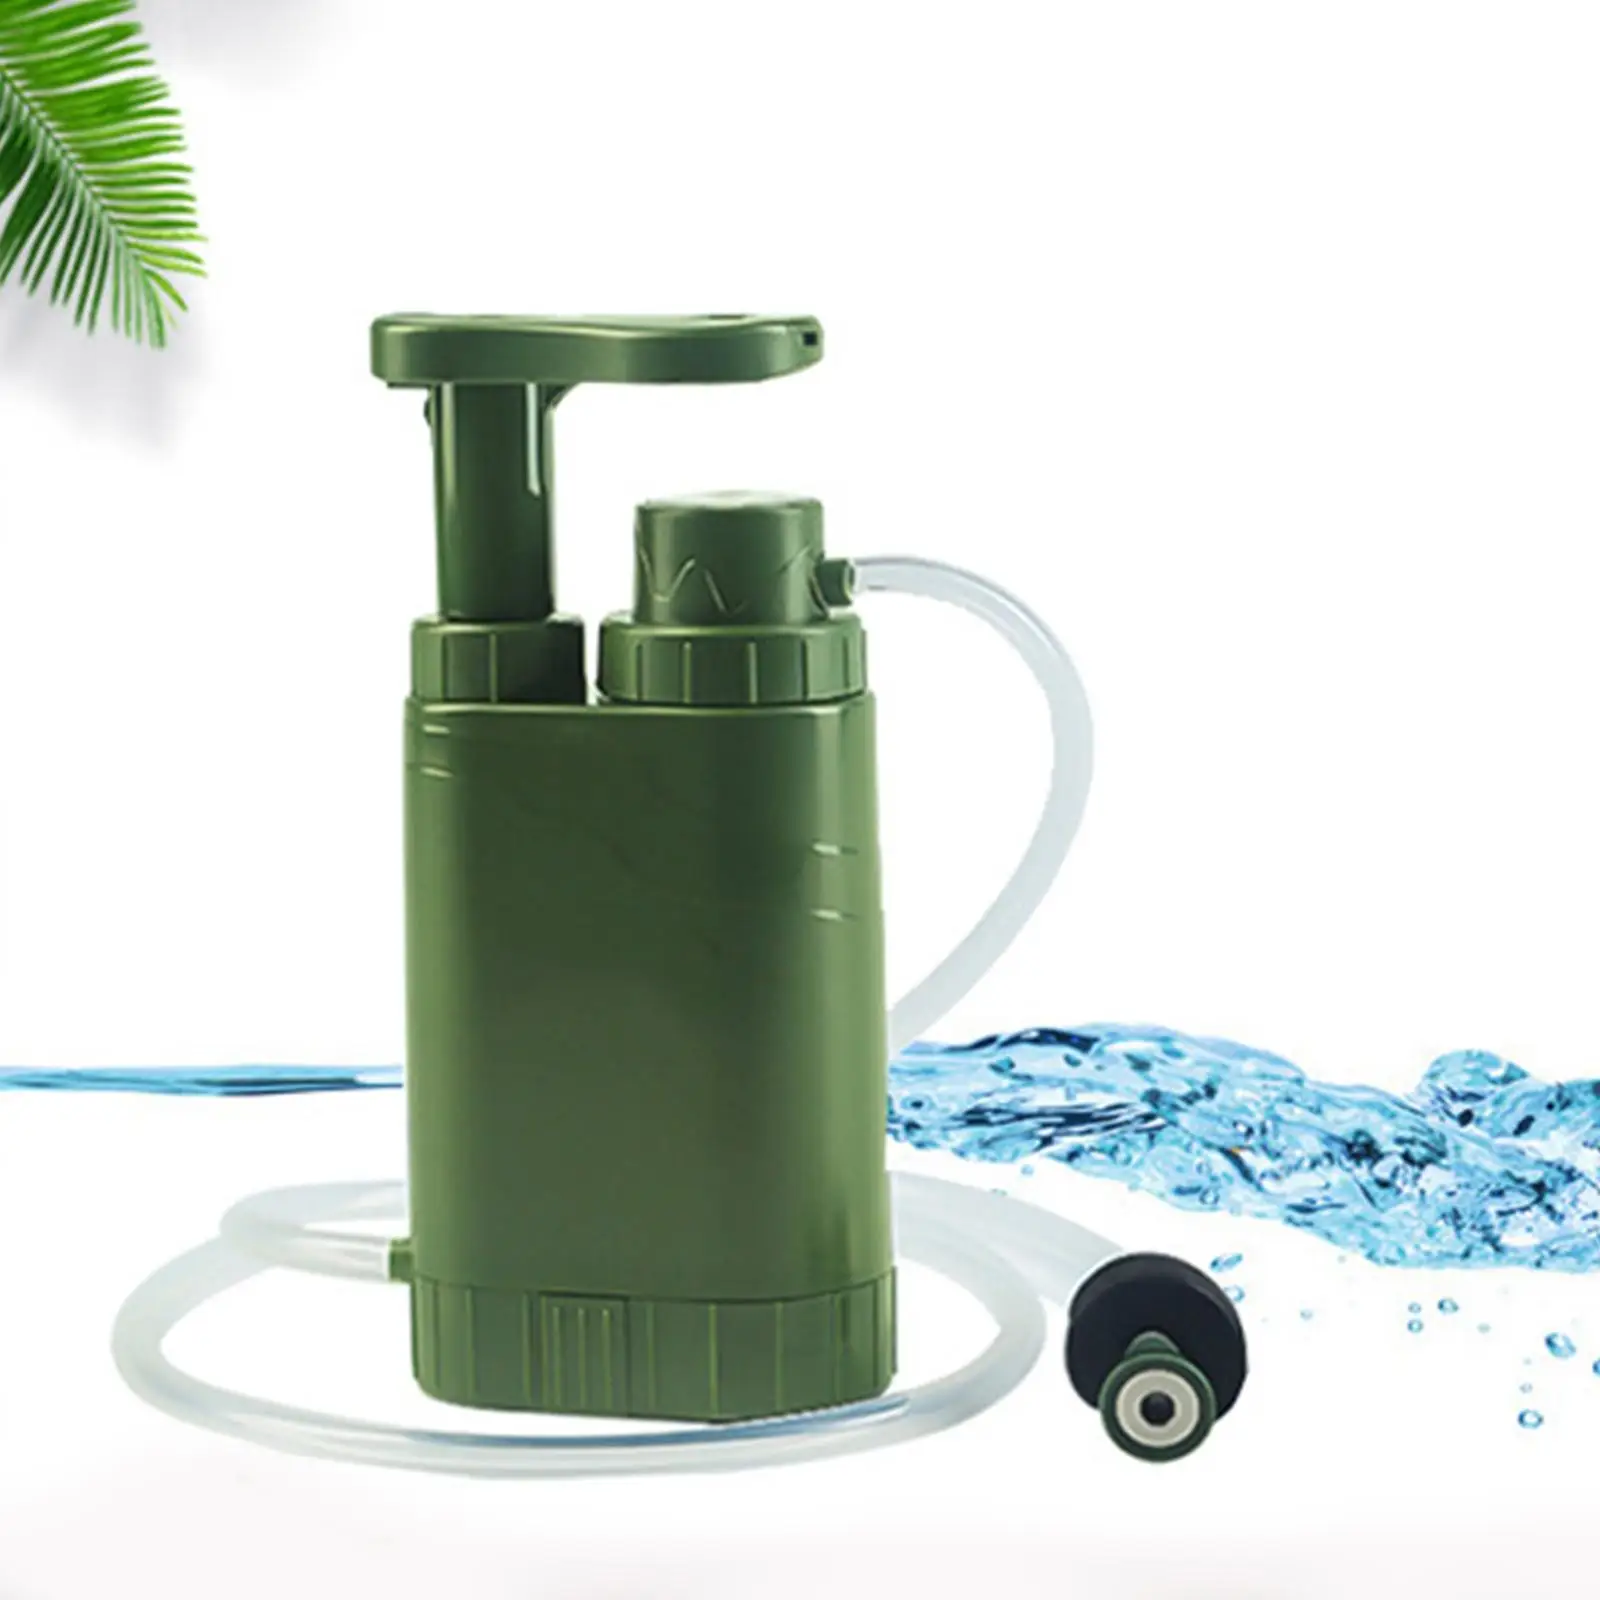 Portable Camping Water Filter 2 Stages Water Filtration System Water Purifier